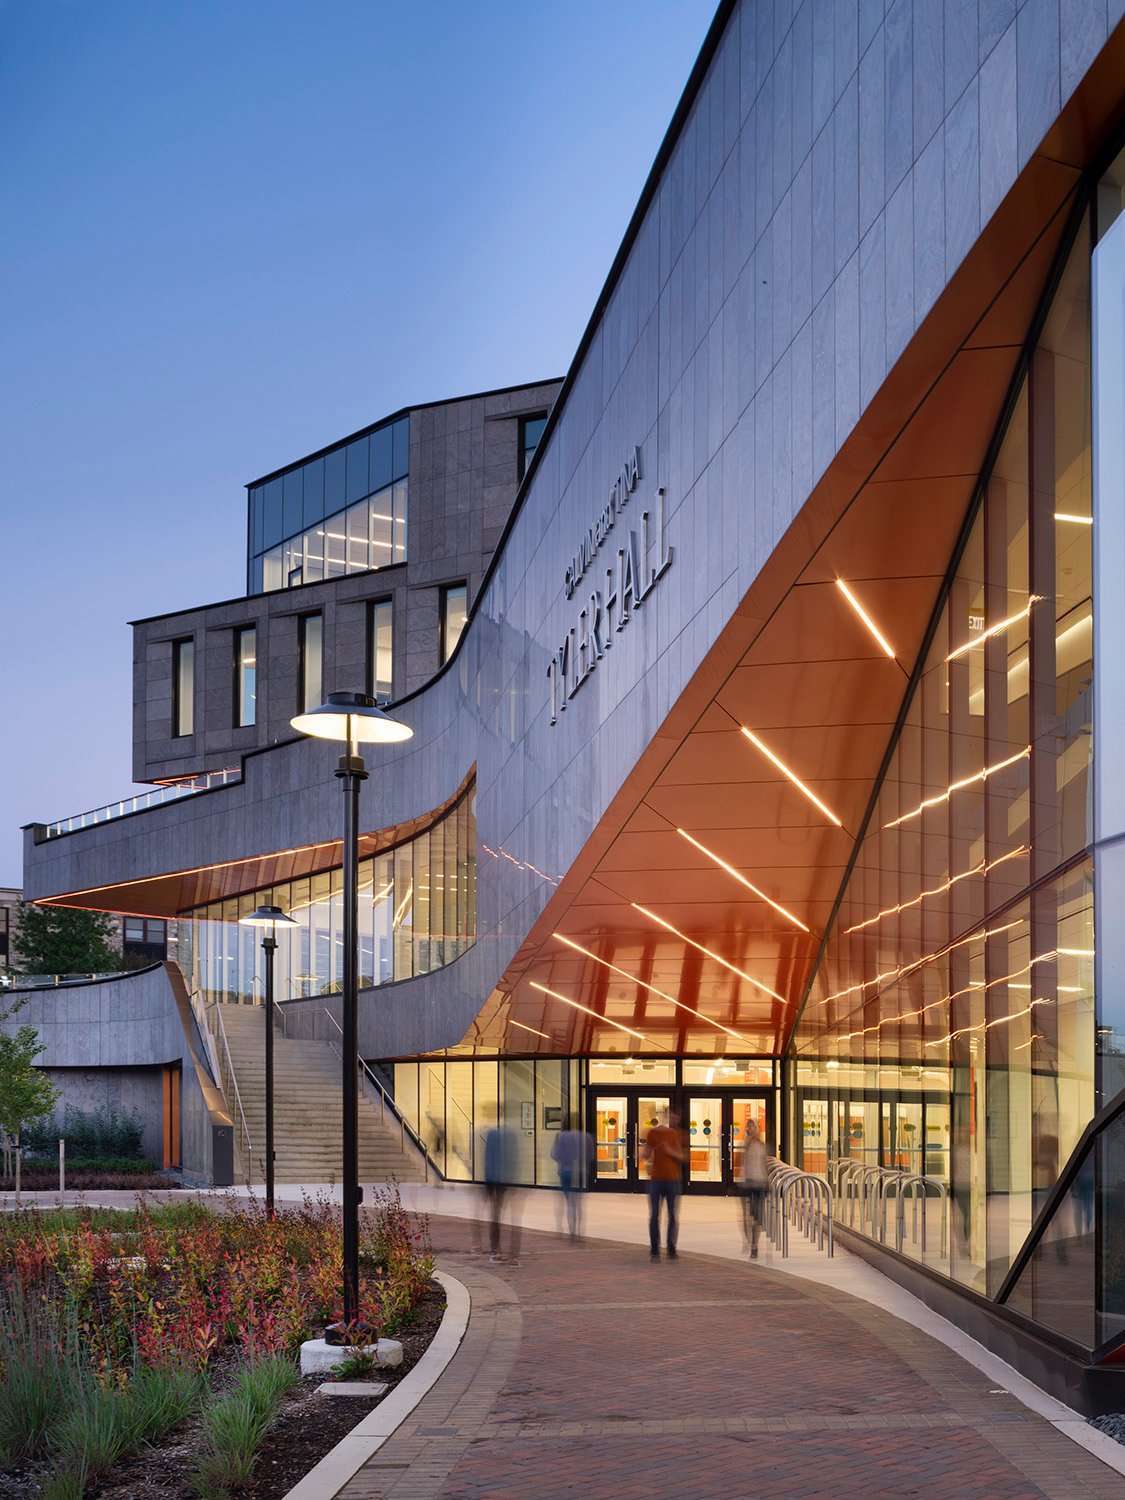 Students and visitors are drawn towards the street-level entrance by the sweeping lines of the facade. An exterior stair stitches the landscaped arrival court with the campus commons above. nic lehoux photographie architecturale | architectural photography